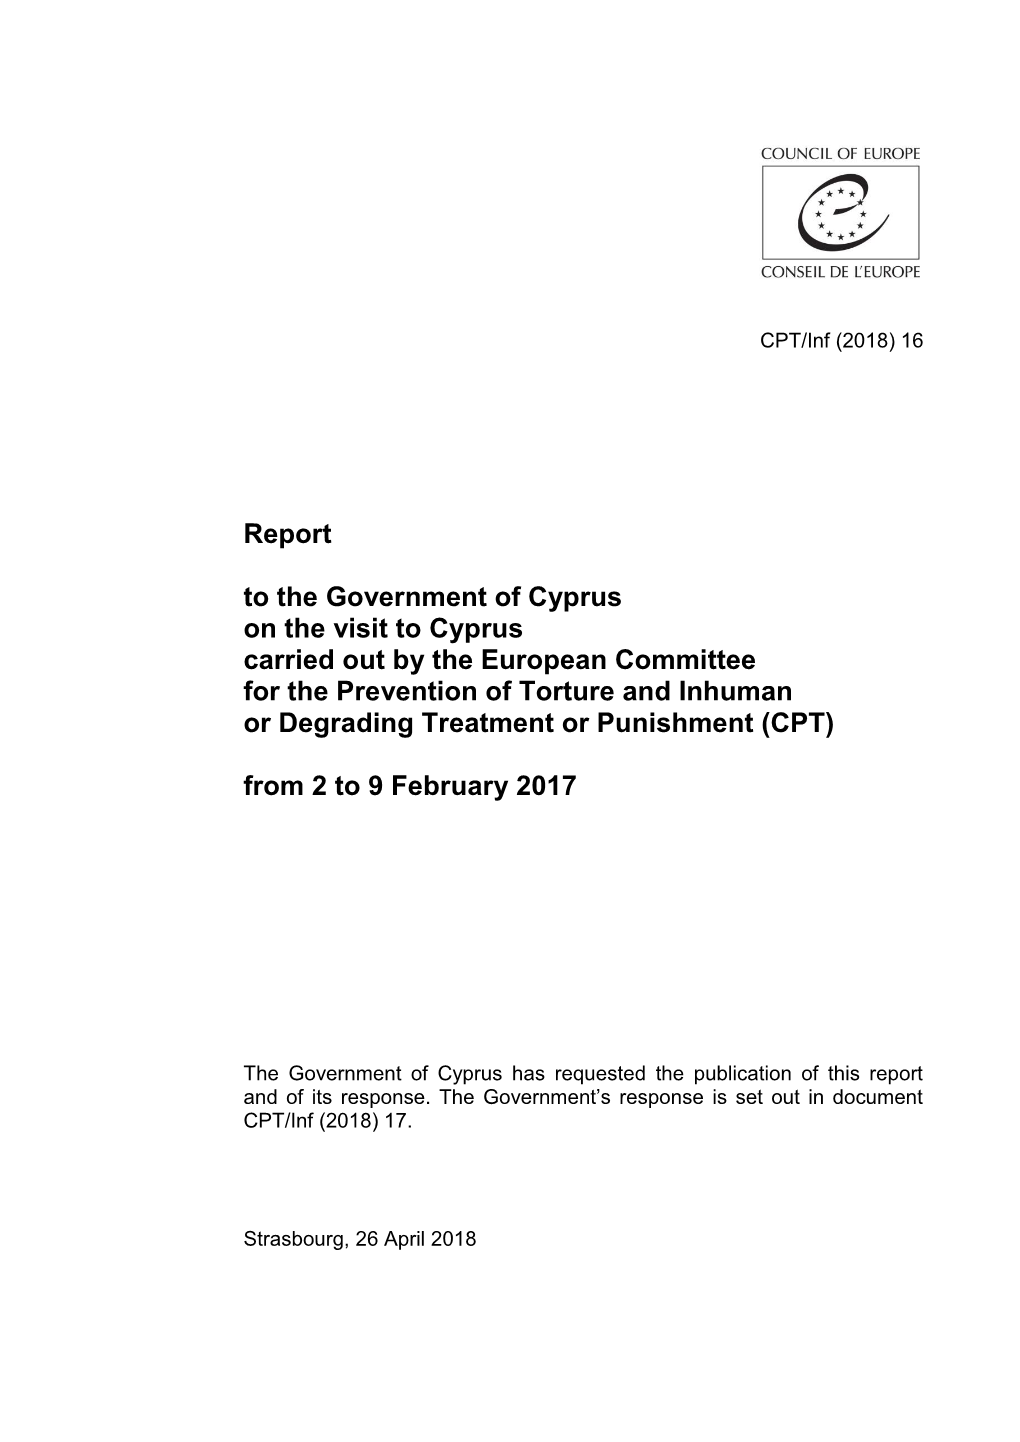 Report to the Government of Cyprus on the Visit to Cyprus